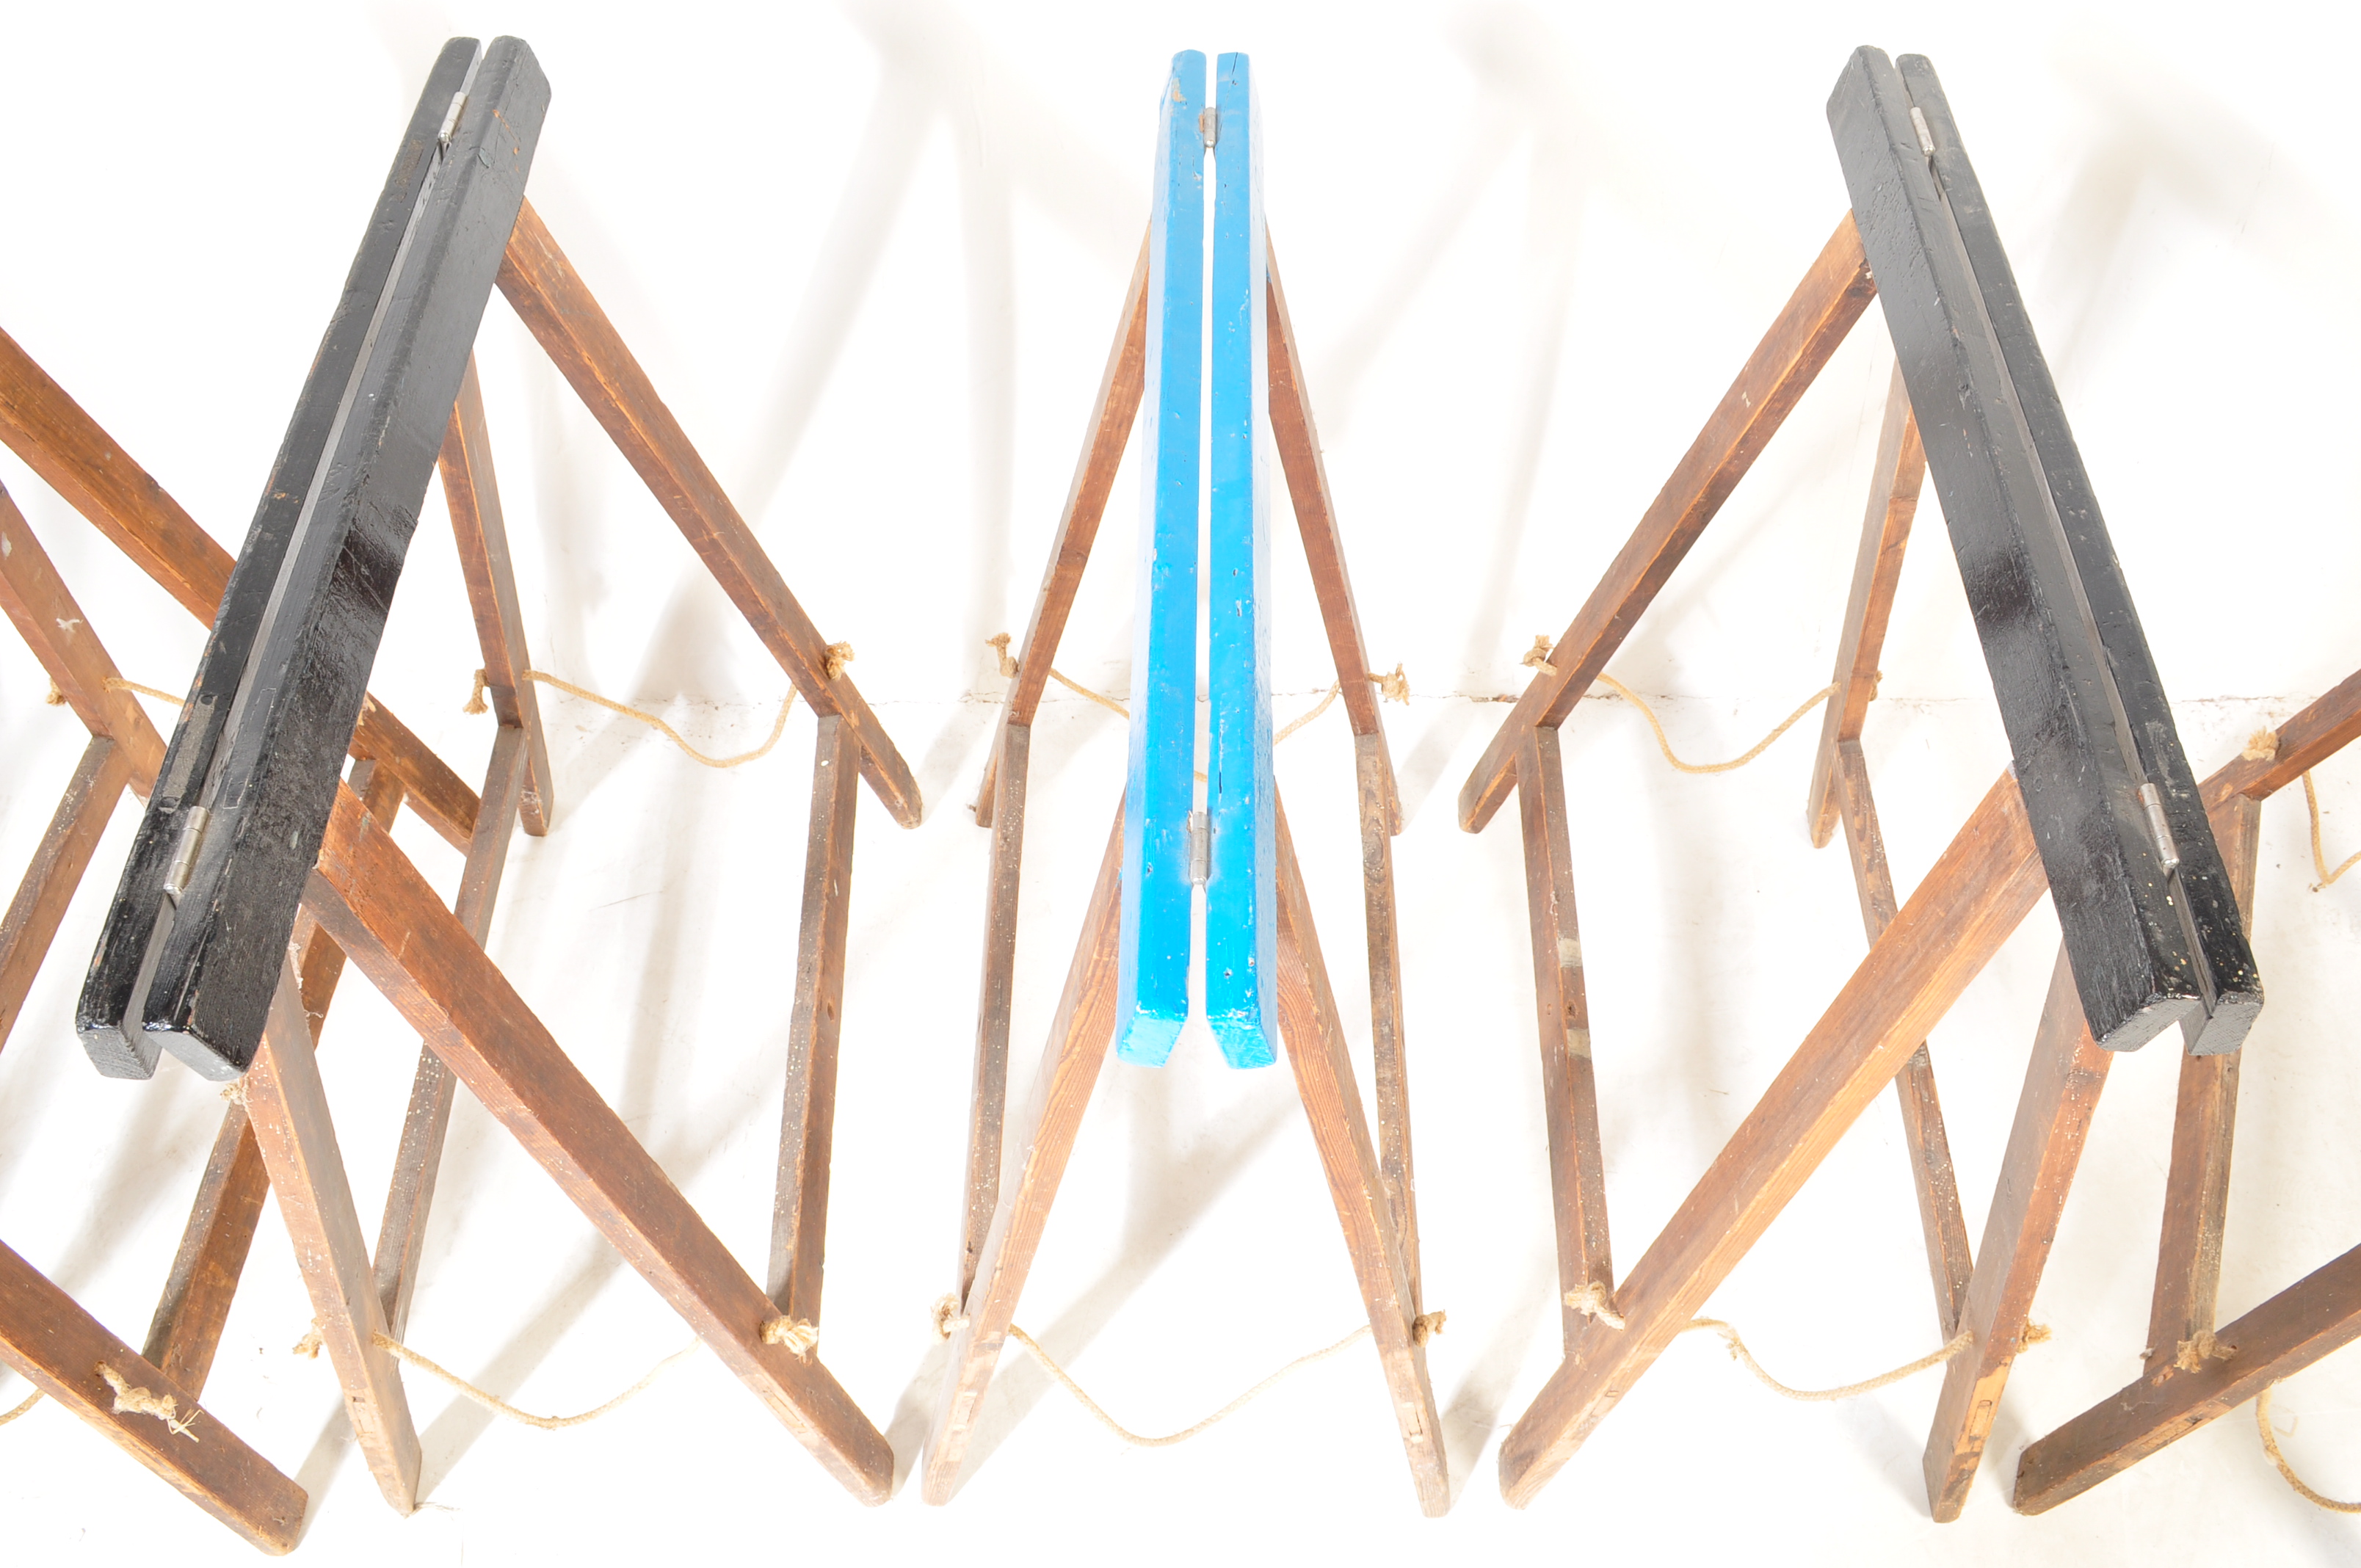 SET OF SIX VINTAGE 20TH CENTURY A-FRAME WOODEN TRESTLES - Image 5 of 6